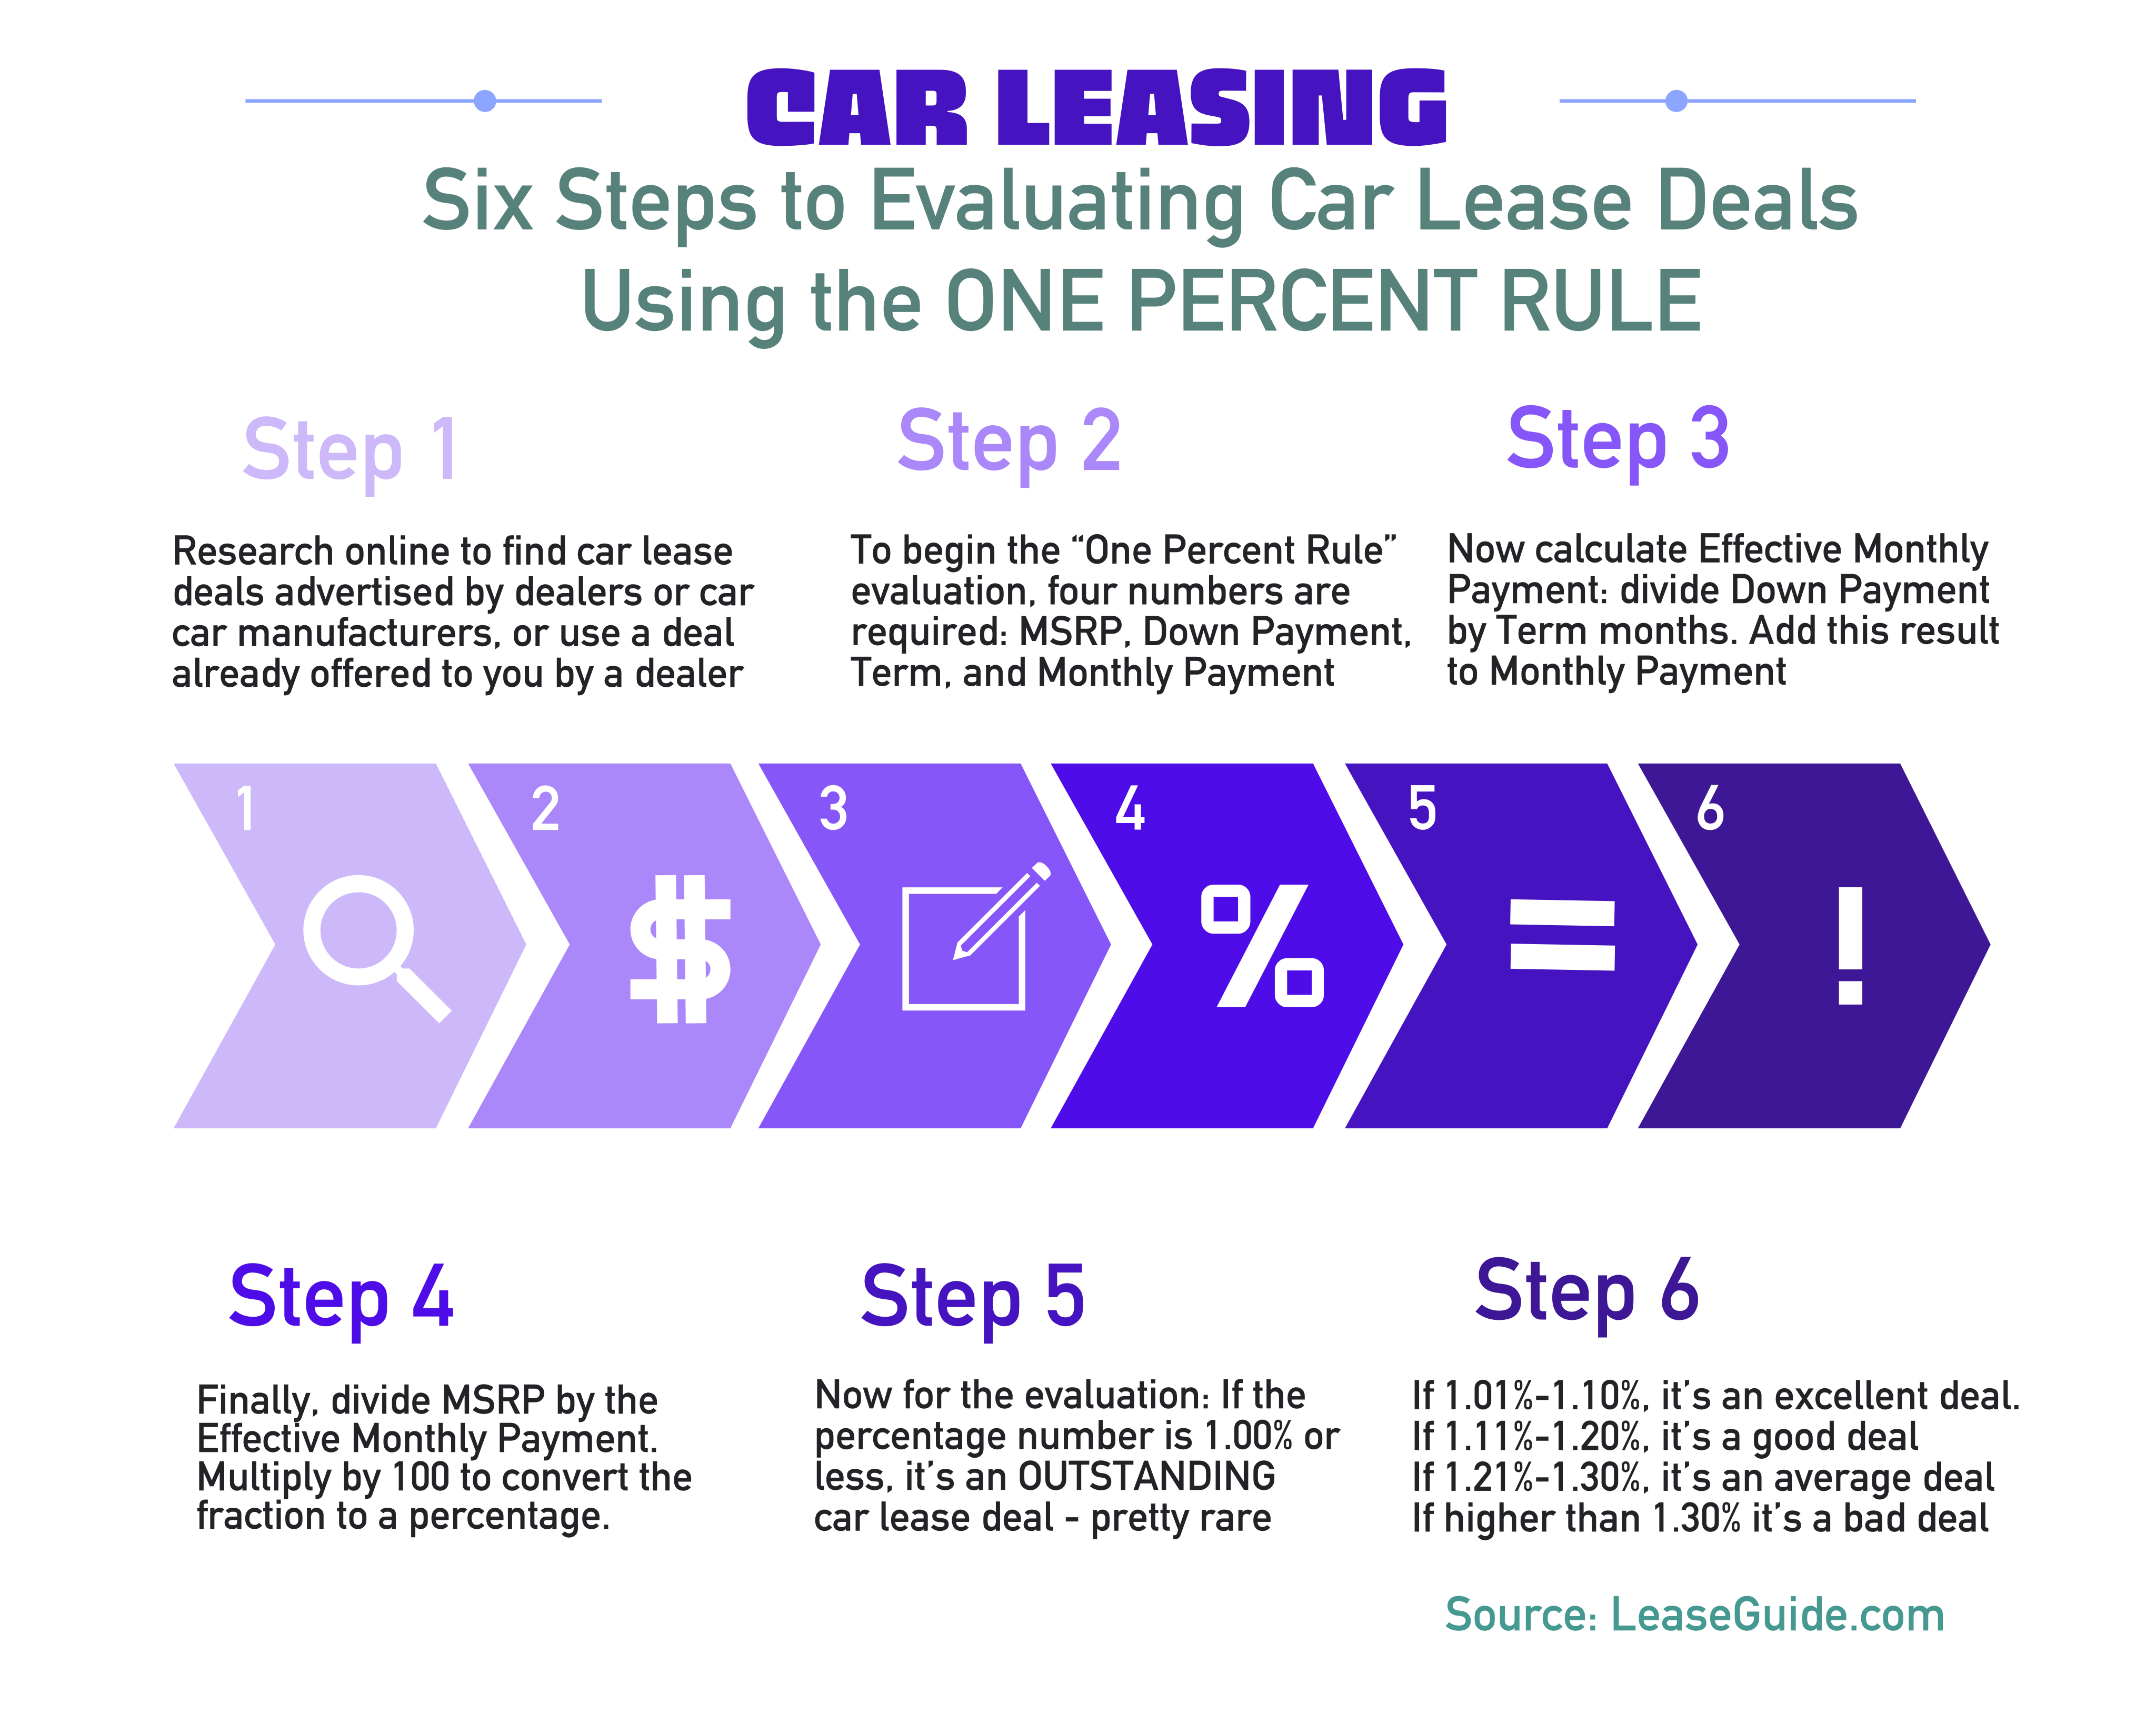 Six Steps to Evaluating Car Lease Deals by